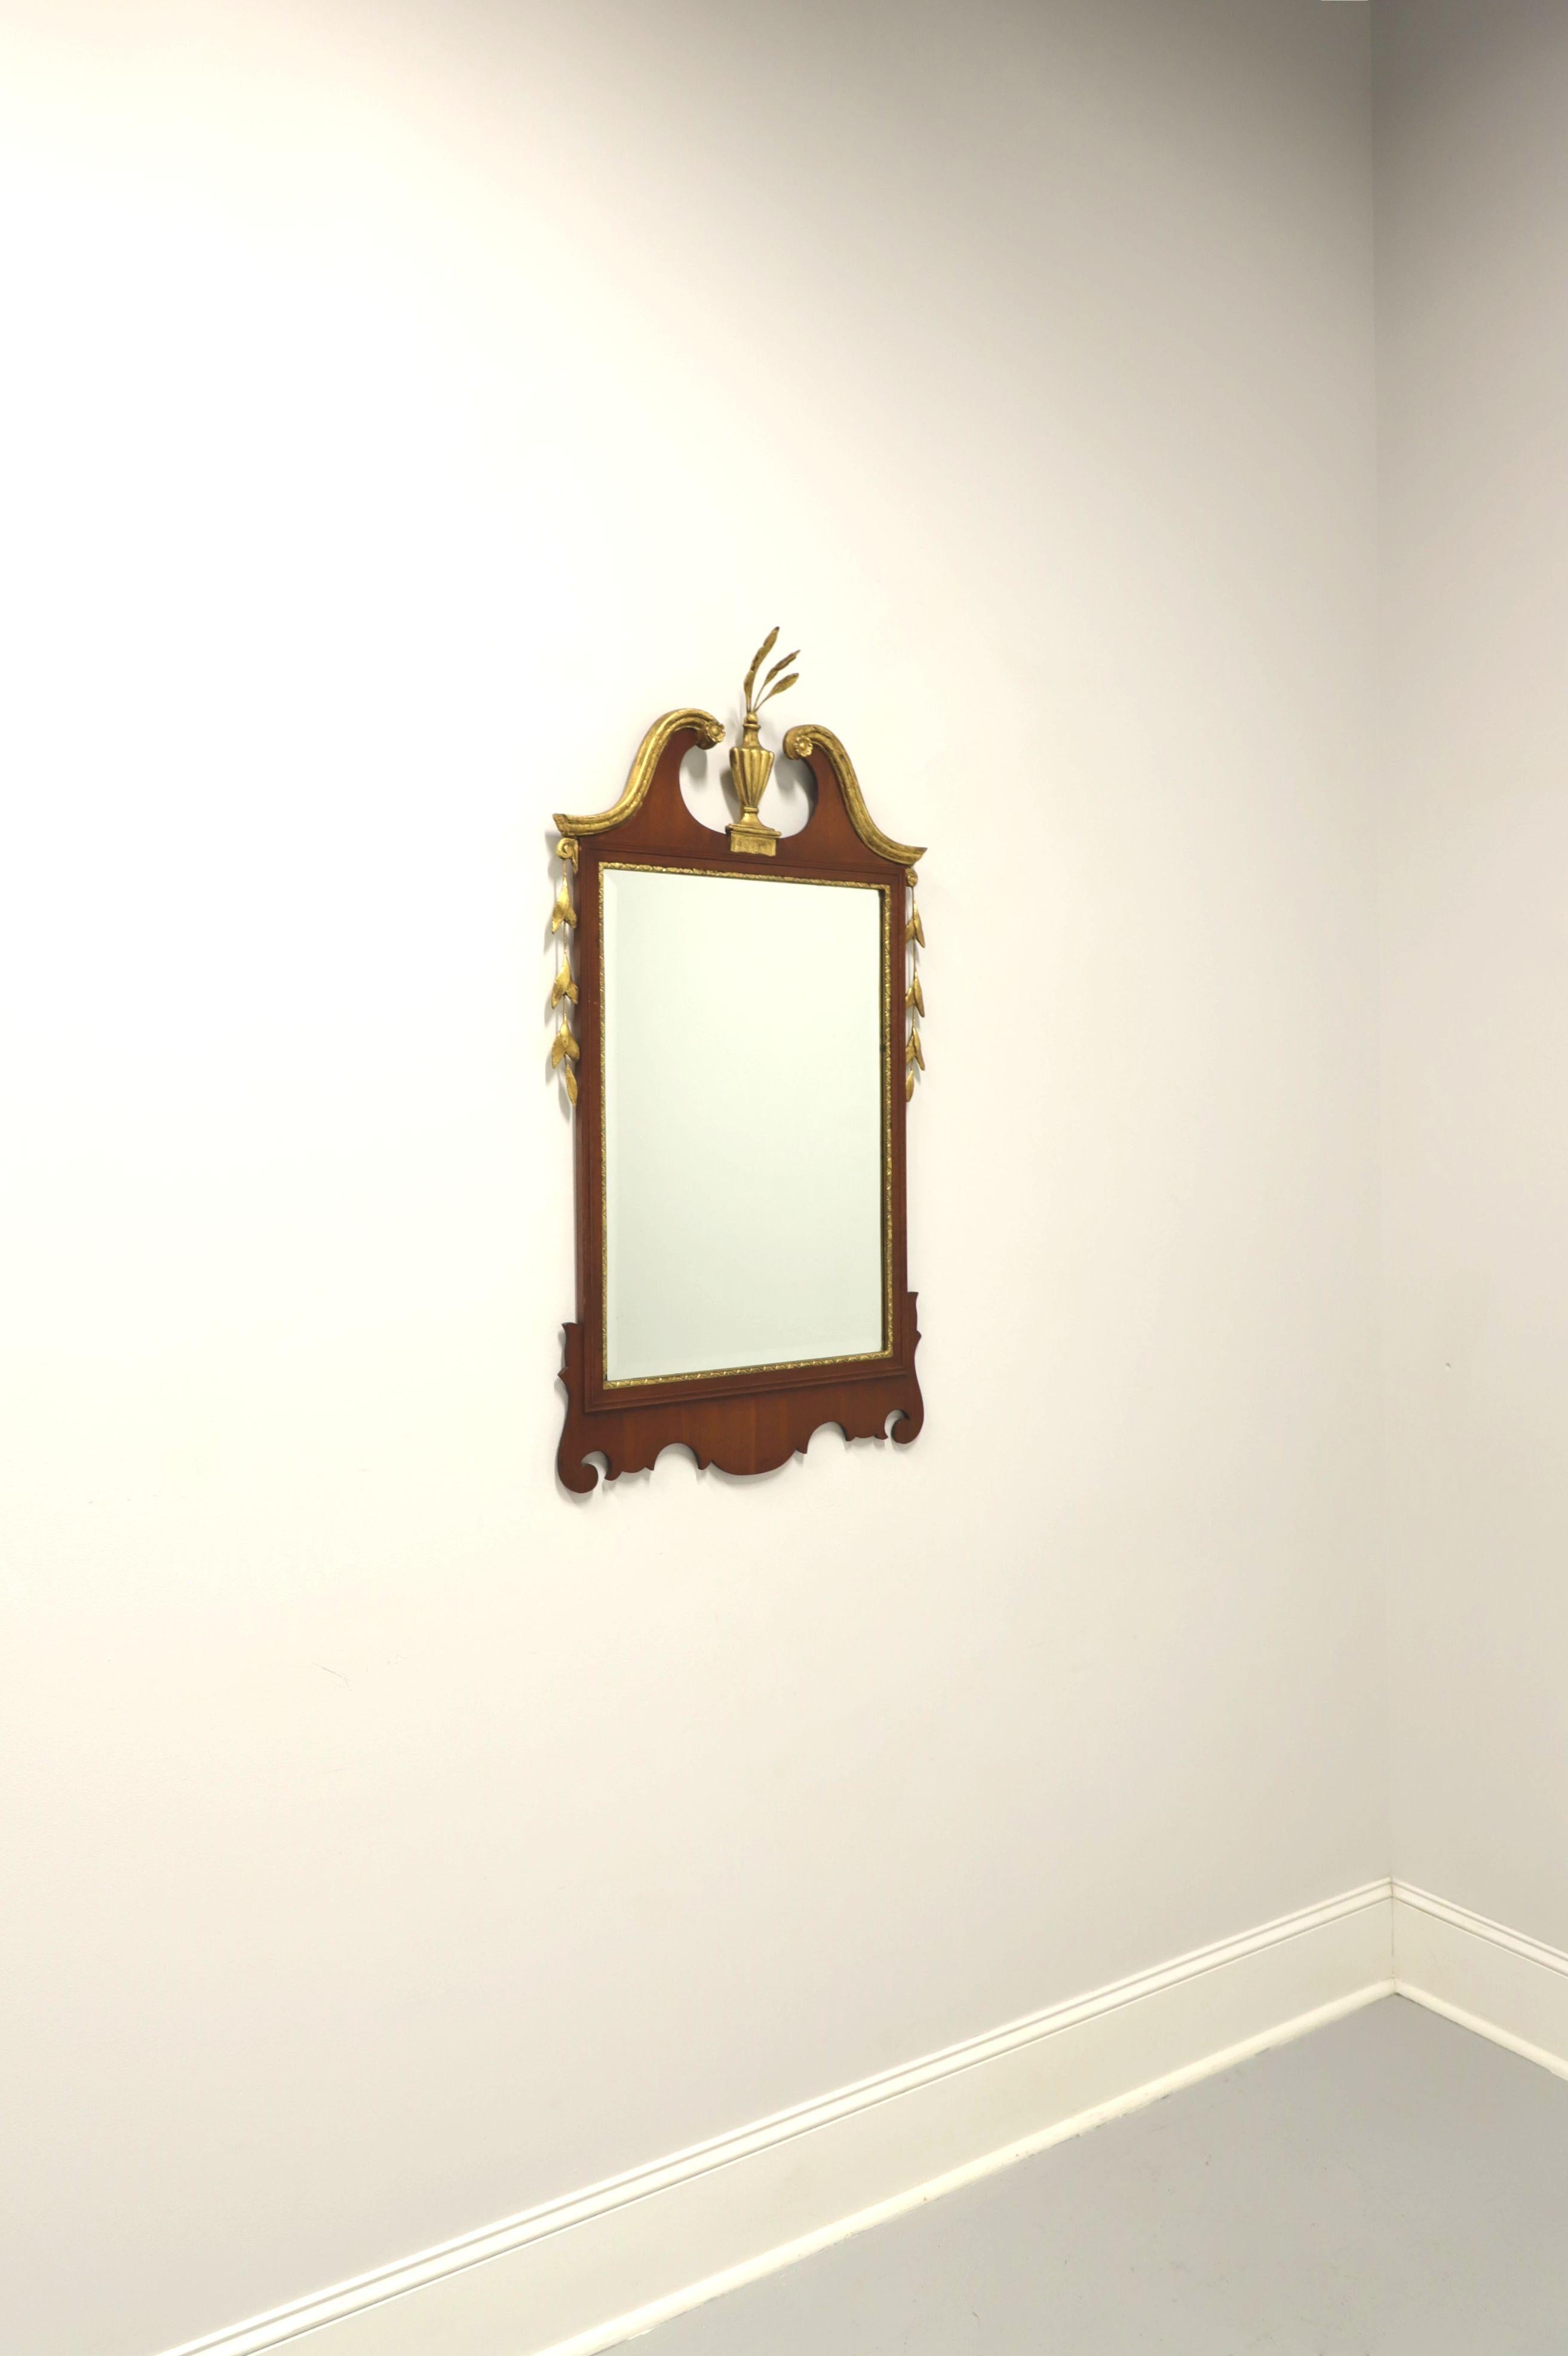 A Traditional style wall mirror by Friedman Brothers. Beveled mirrored glass in a mahogany frame with decoratively carved gold trim and center surmounted by gilded carved Prince of Wales Plumes. Made in the USA, in the mid 20th Century.

Measures: